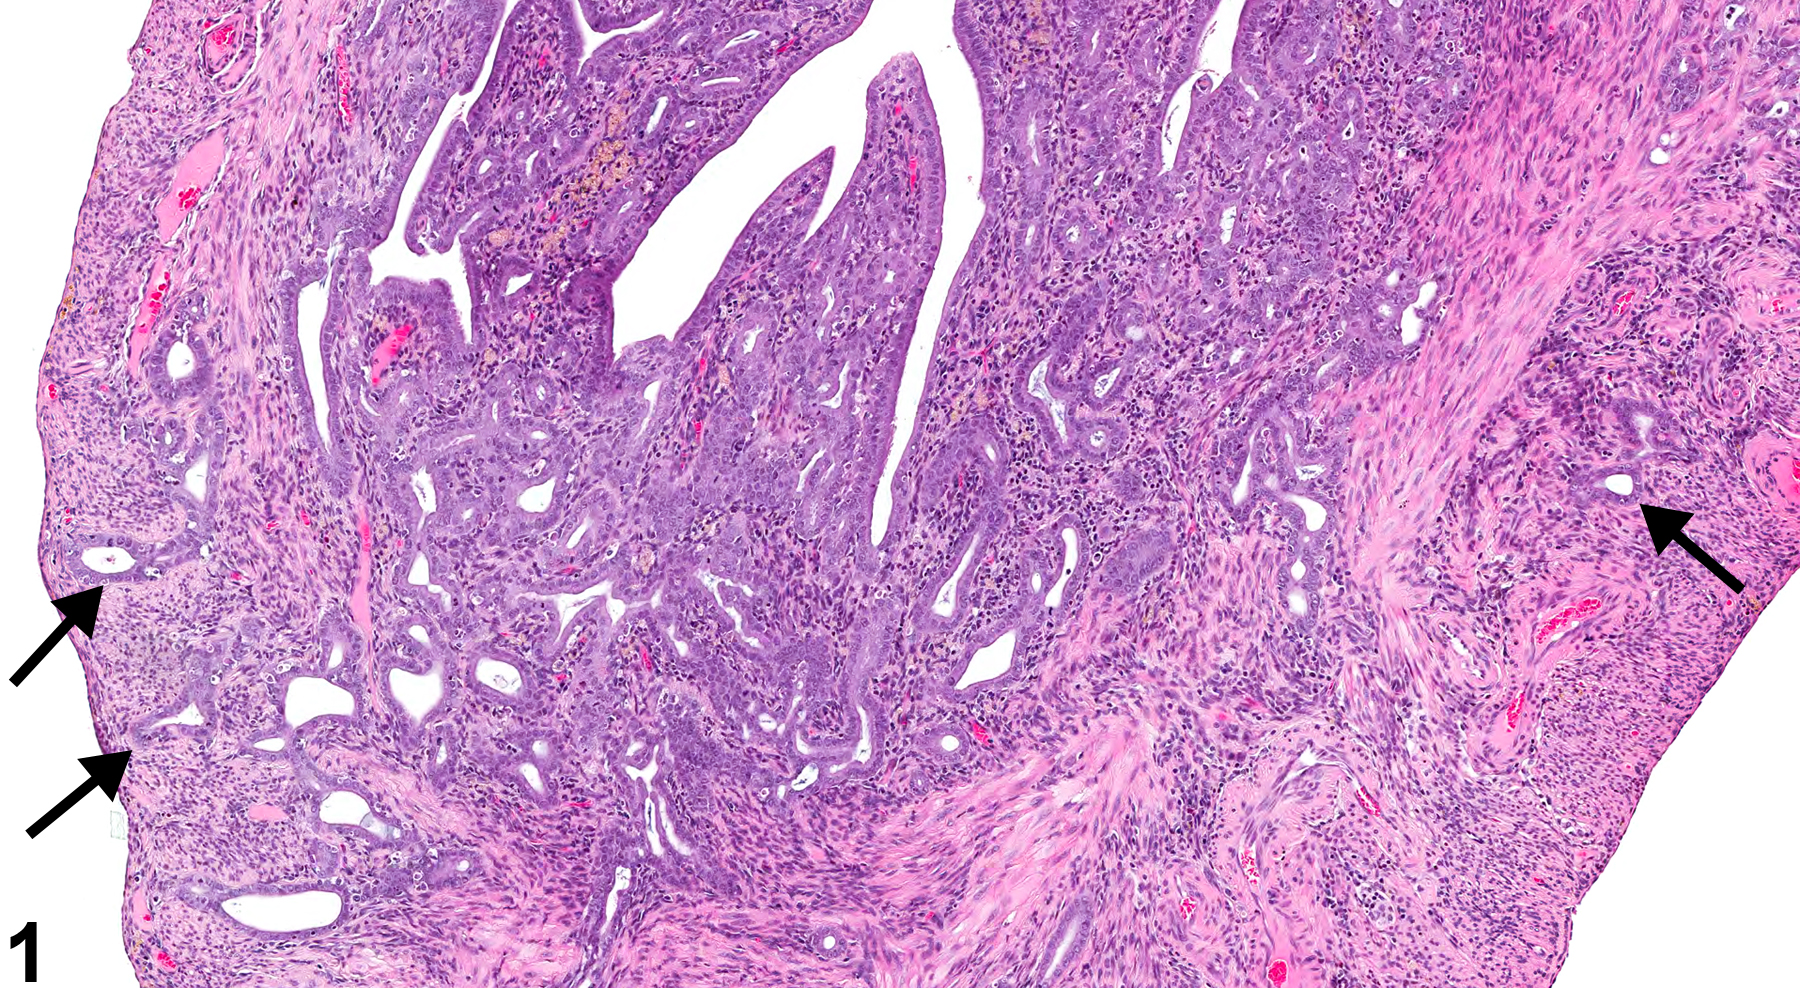 Image of adenomyosis in the uterus from a female Harlan Sprague-Dawley rat in a chronic study